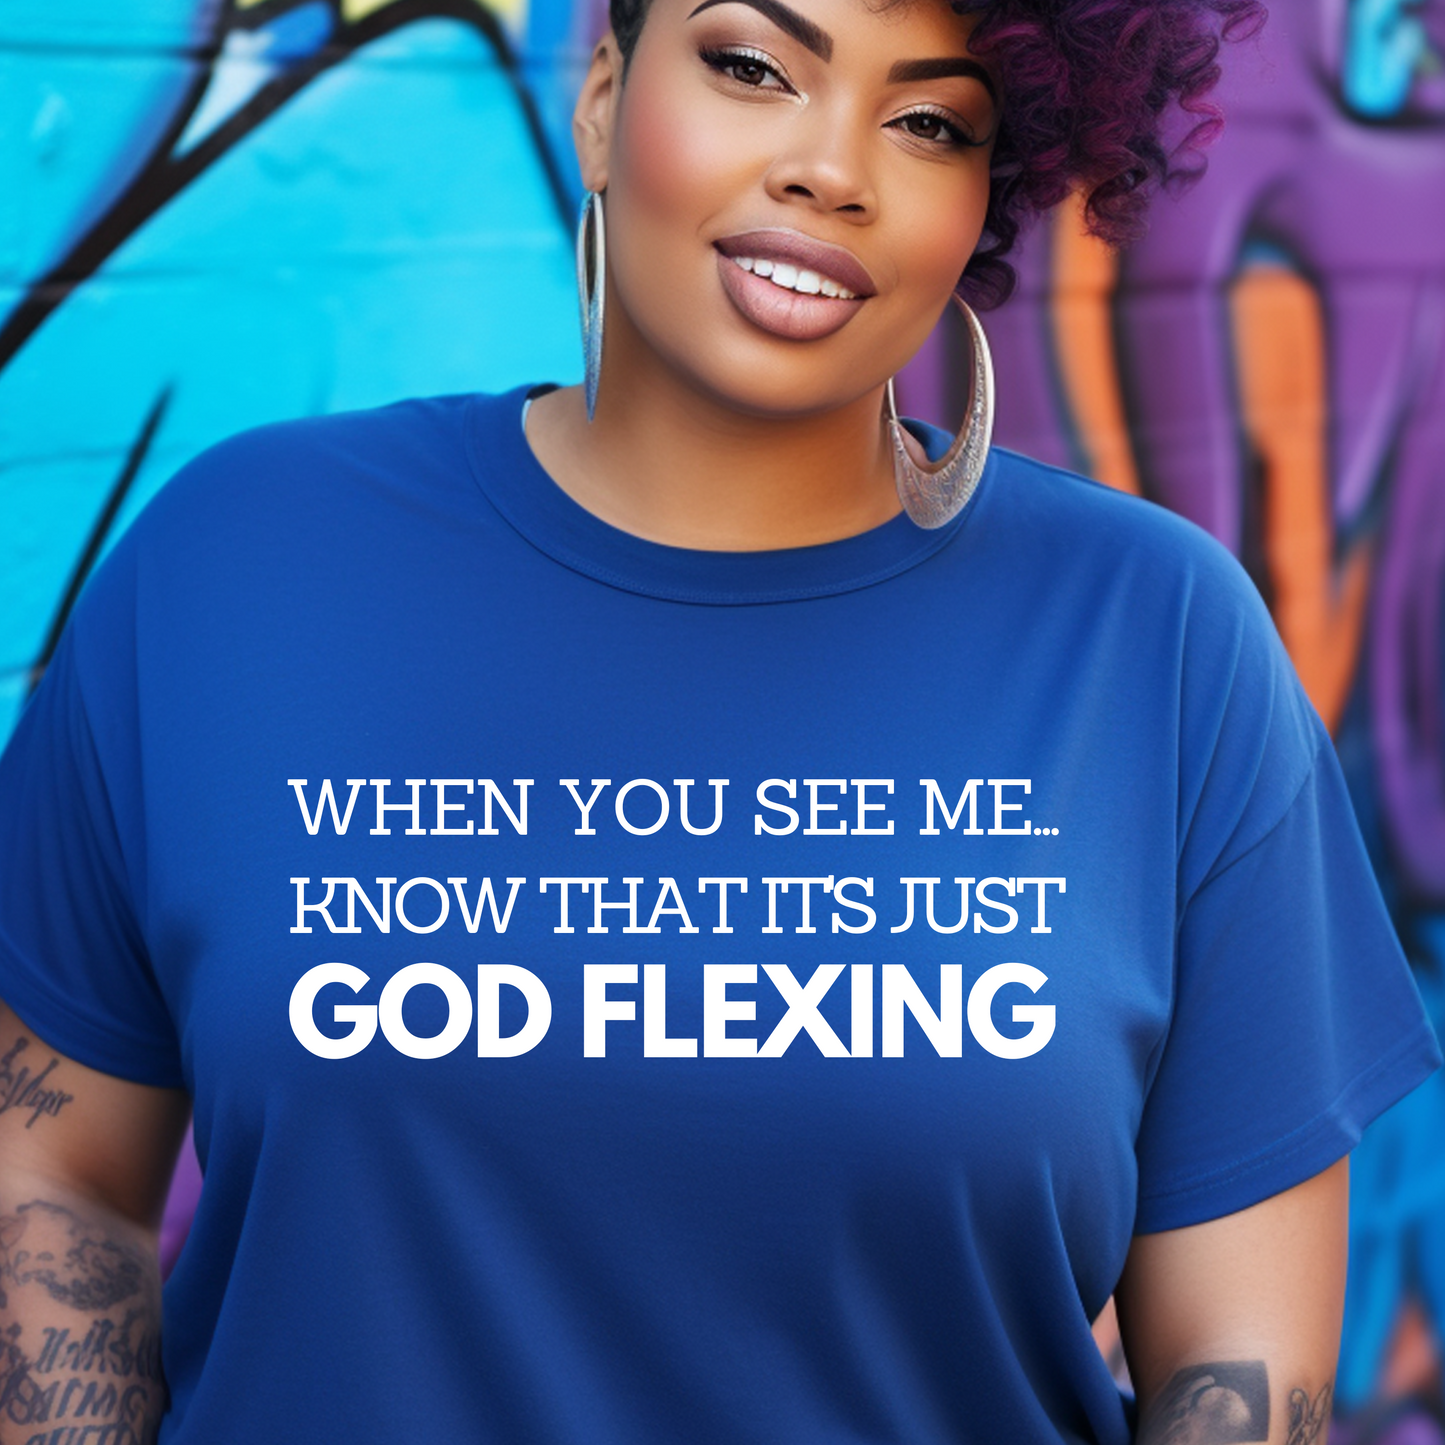 Stunning royal blue 'When You See Me Know That it's just God Flexing' T-shirt from Triumph Tees. This faith-inspired apparel is a modern way to show your belief and reverence for God.